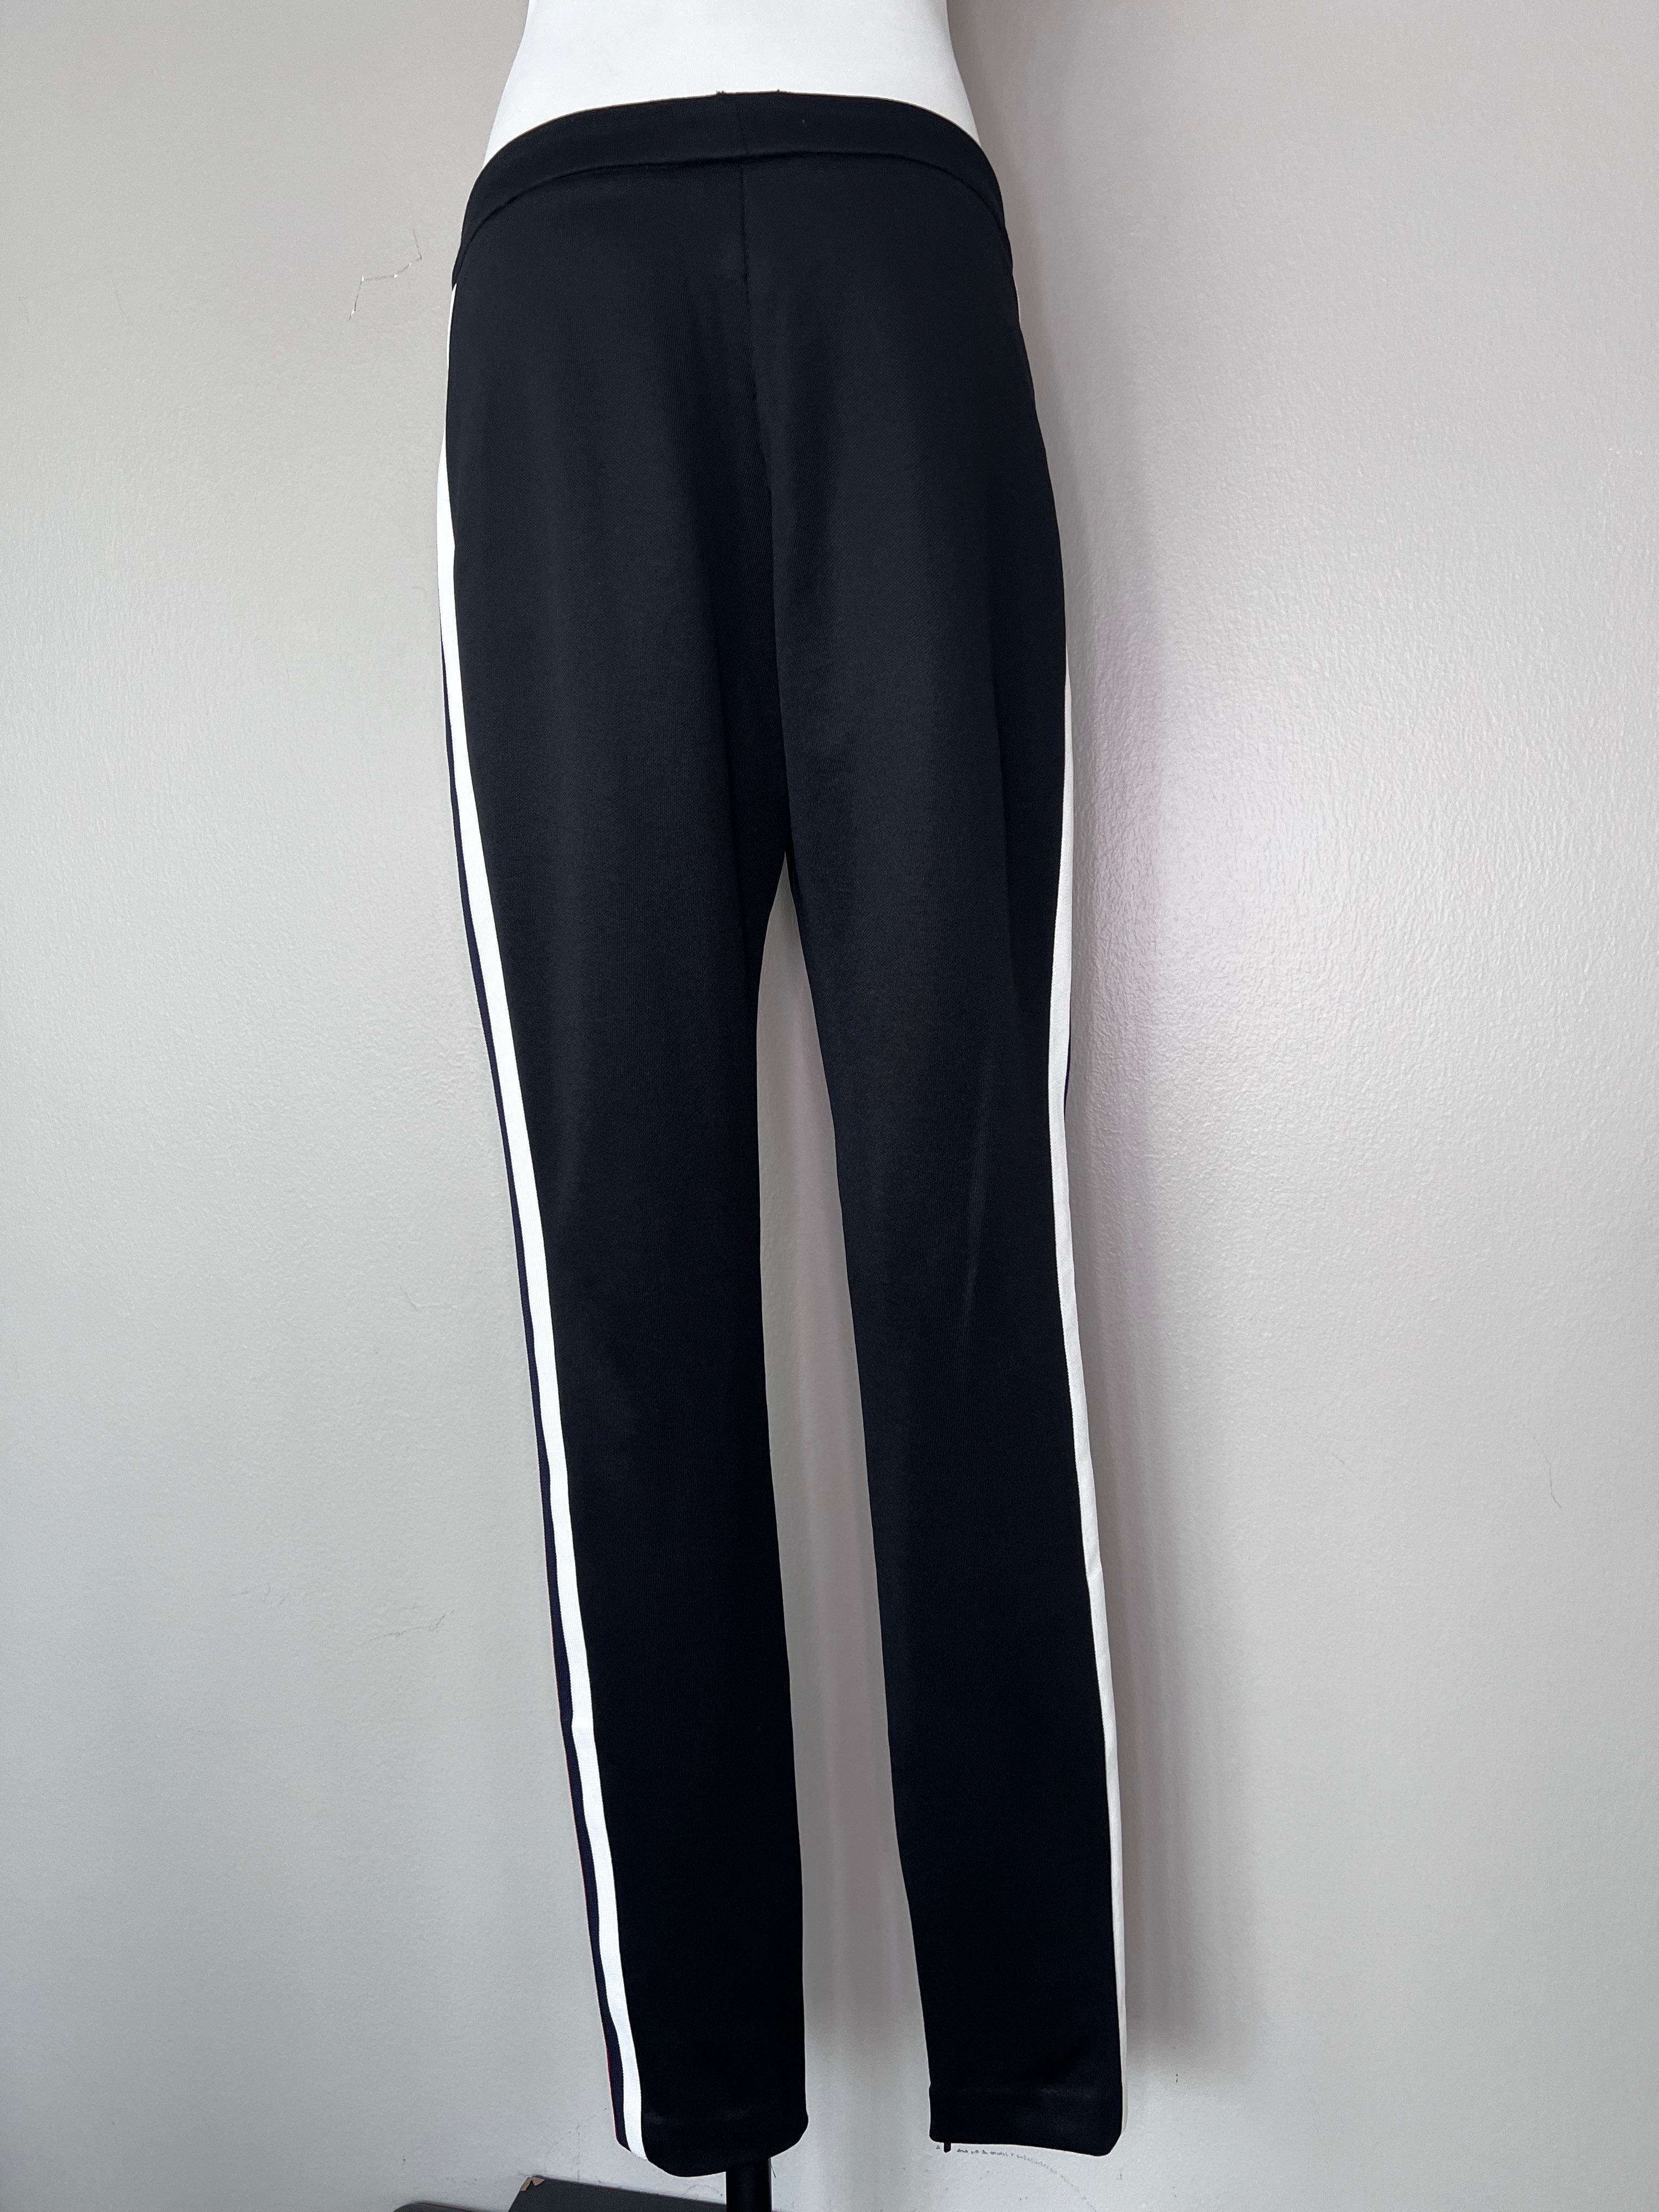 Black straight leg Guccci joggers with red, blue, and white stripes on the sides.